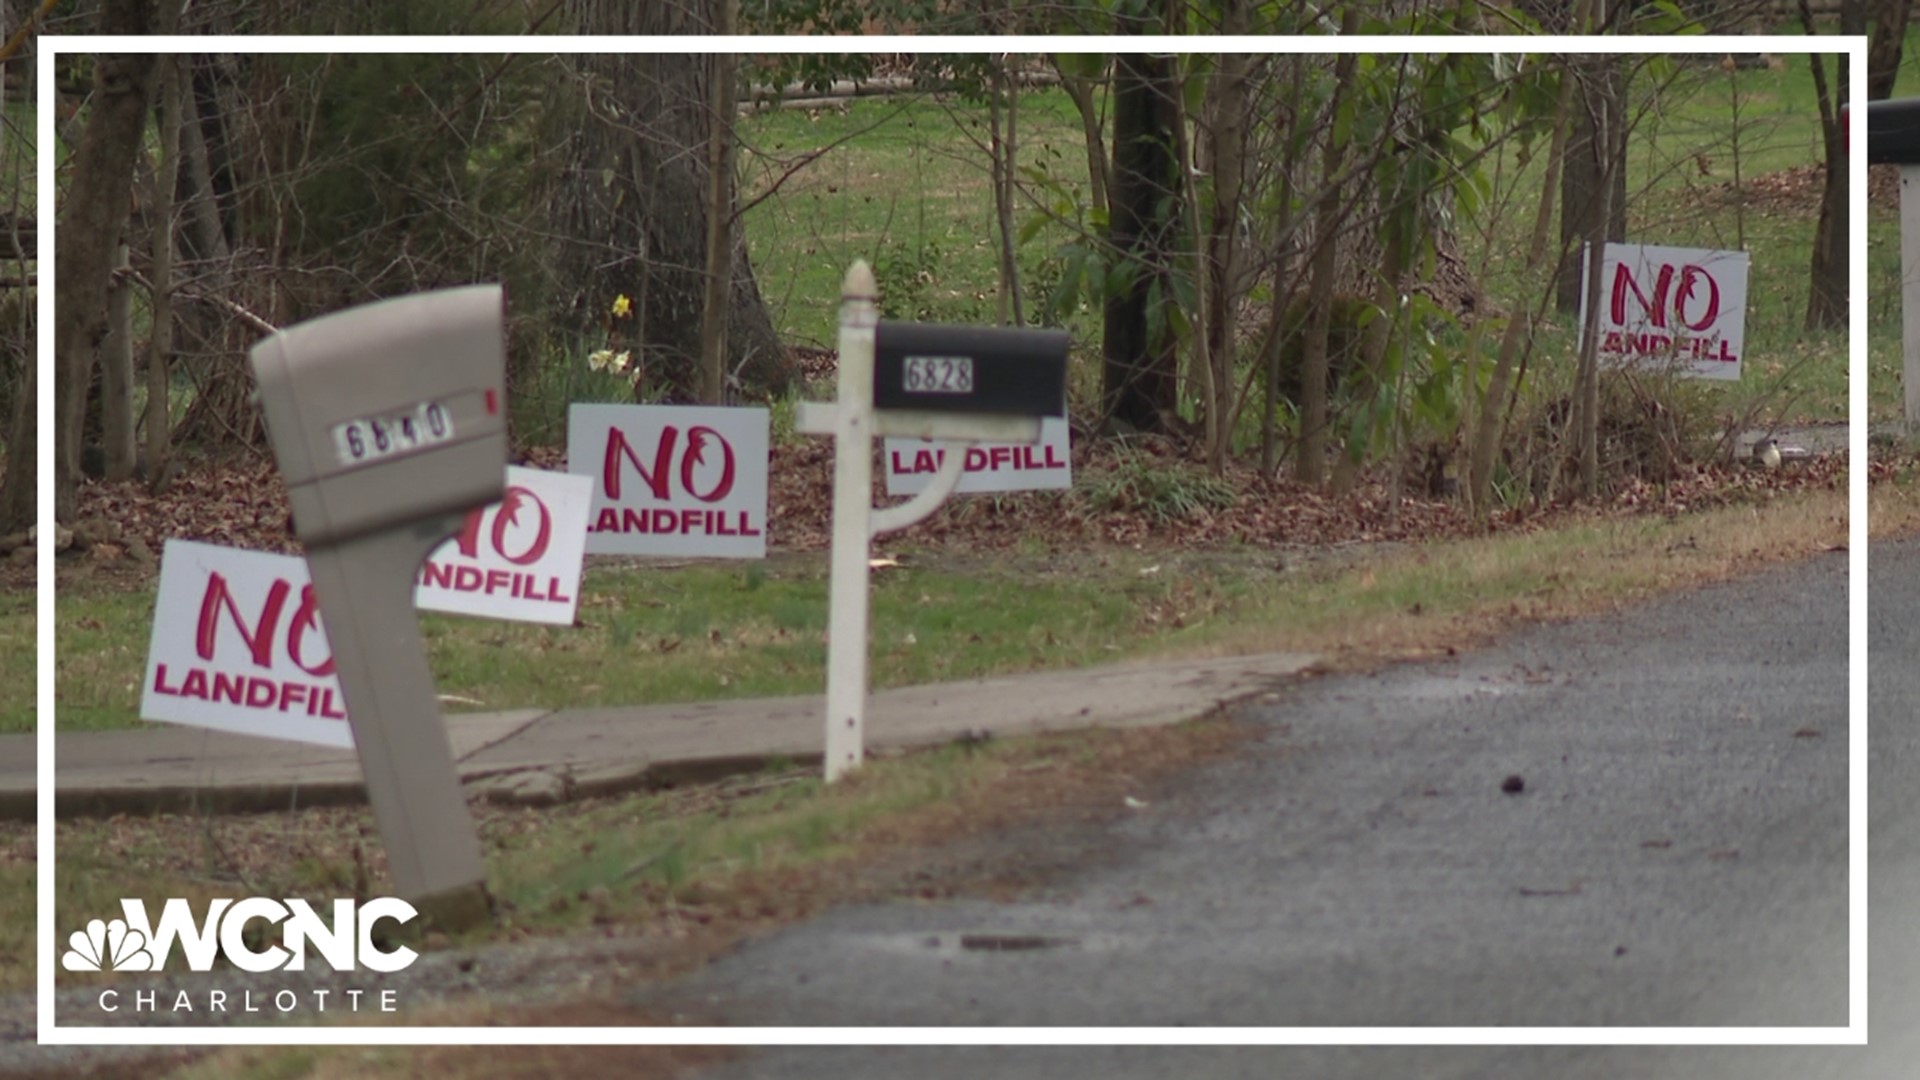 WCNC's Julia Kauffman shares what the upset neighbors have to say.